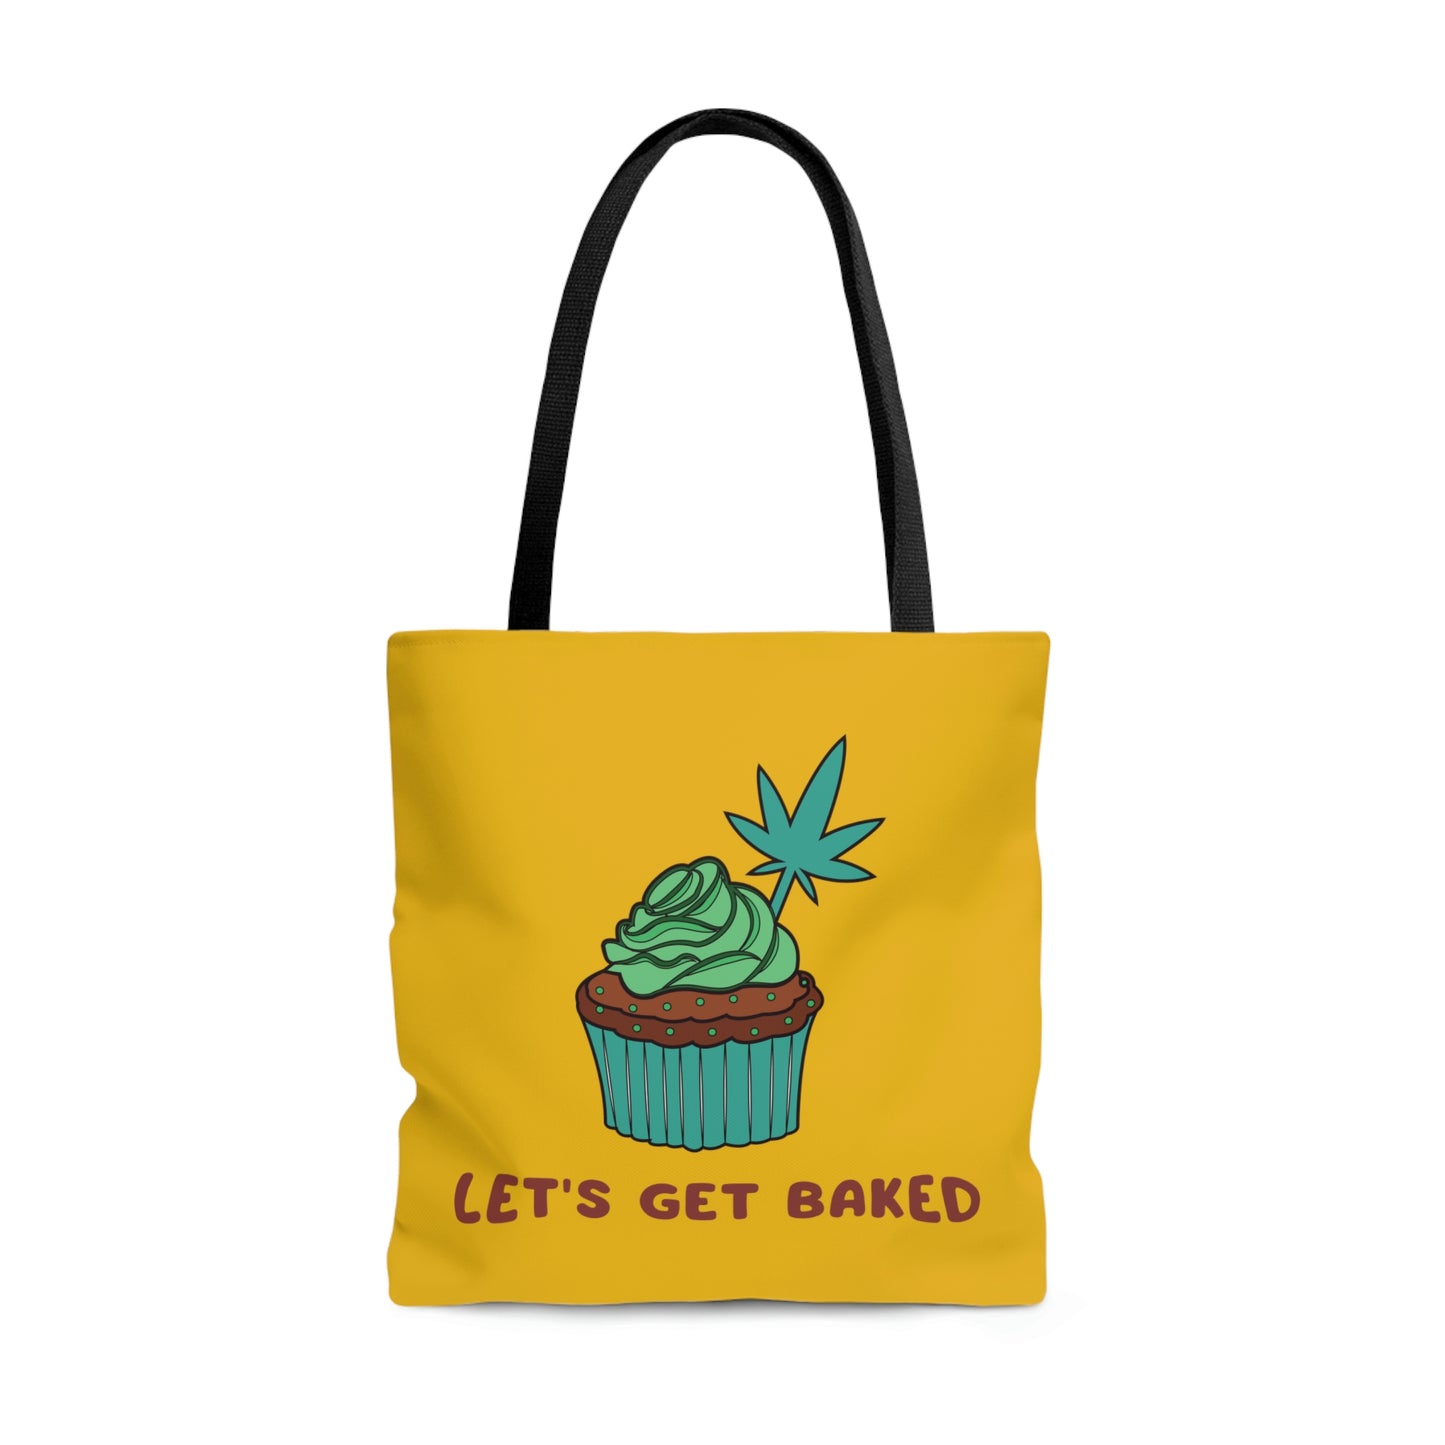 Bright Let's Get Baked Yellow Cannabis Tote Bag with cannabis cupcake designed on front 